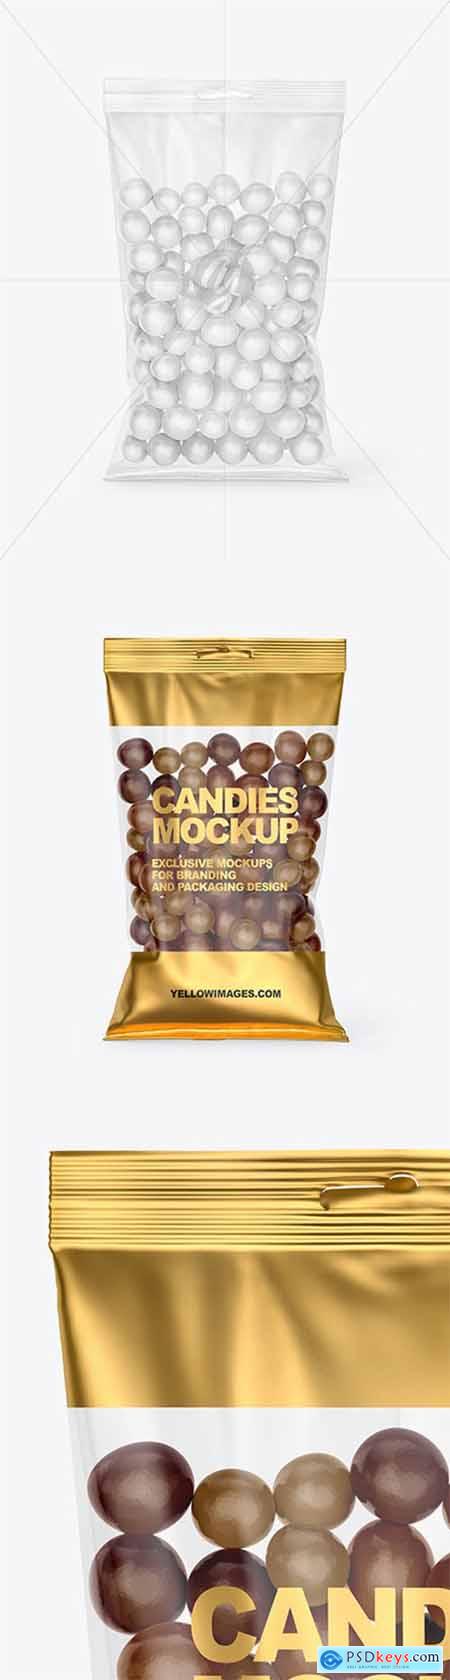 Download Bag With Candies Mockup 56302 Free Download Photoshop Vector Stock Image Via Torrent Zippyshare From Psdkeys Com PSD Mockup Templates